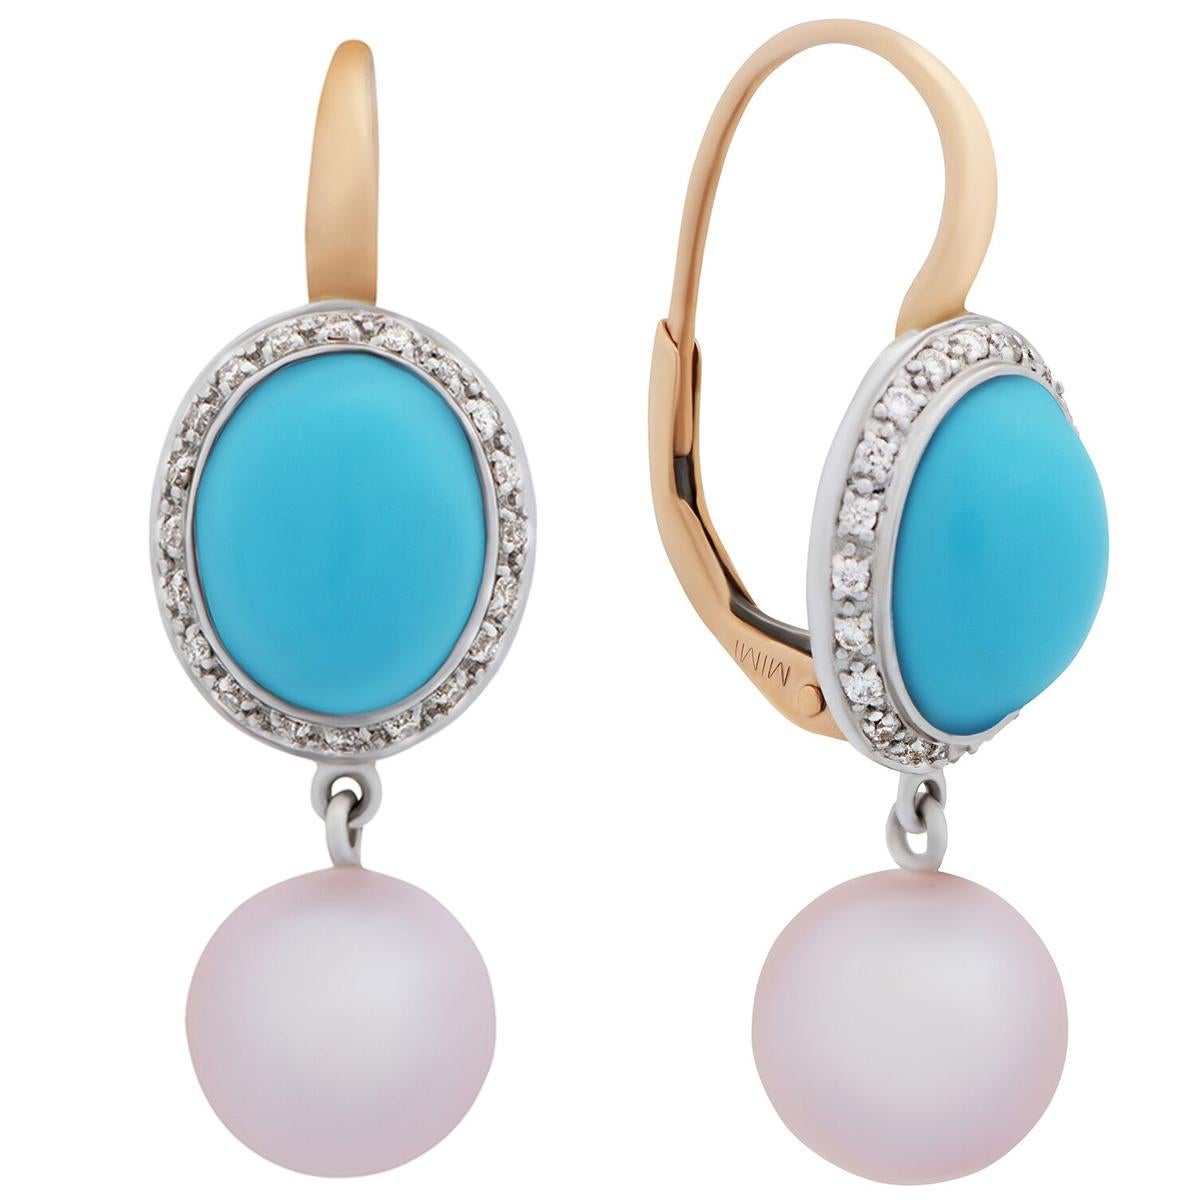 A fabulous pair of Mimi Milano earrings featuring 5.10cts of turquoise, complemented by 8mm freshwater pearls in 18k white gold and rose gold.